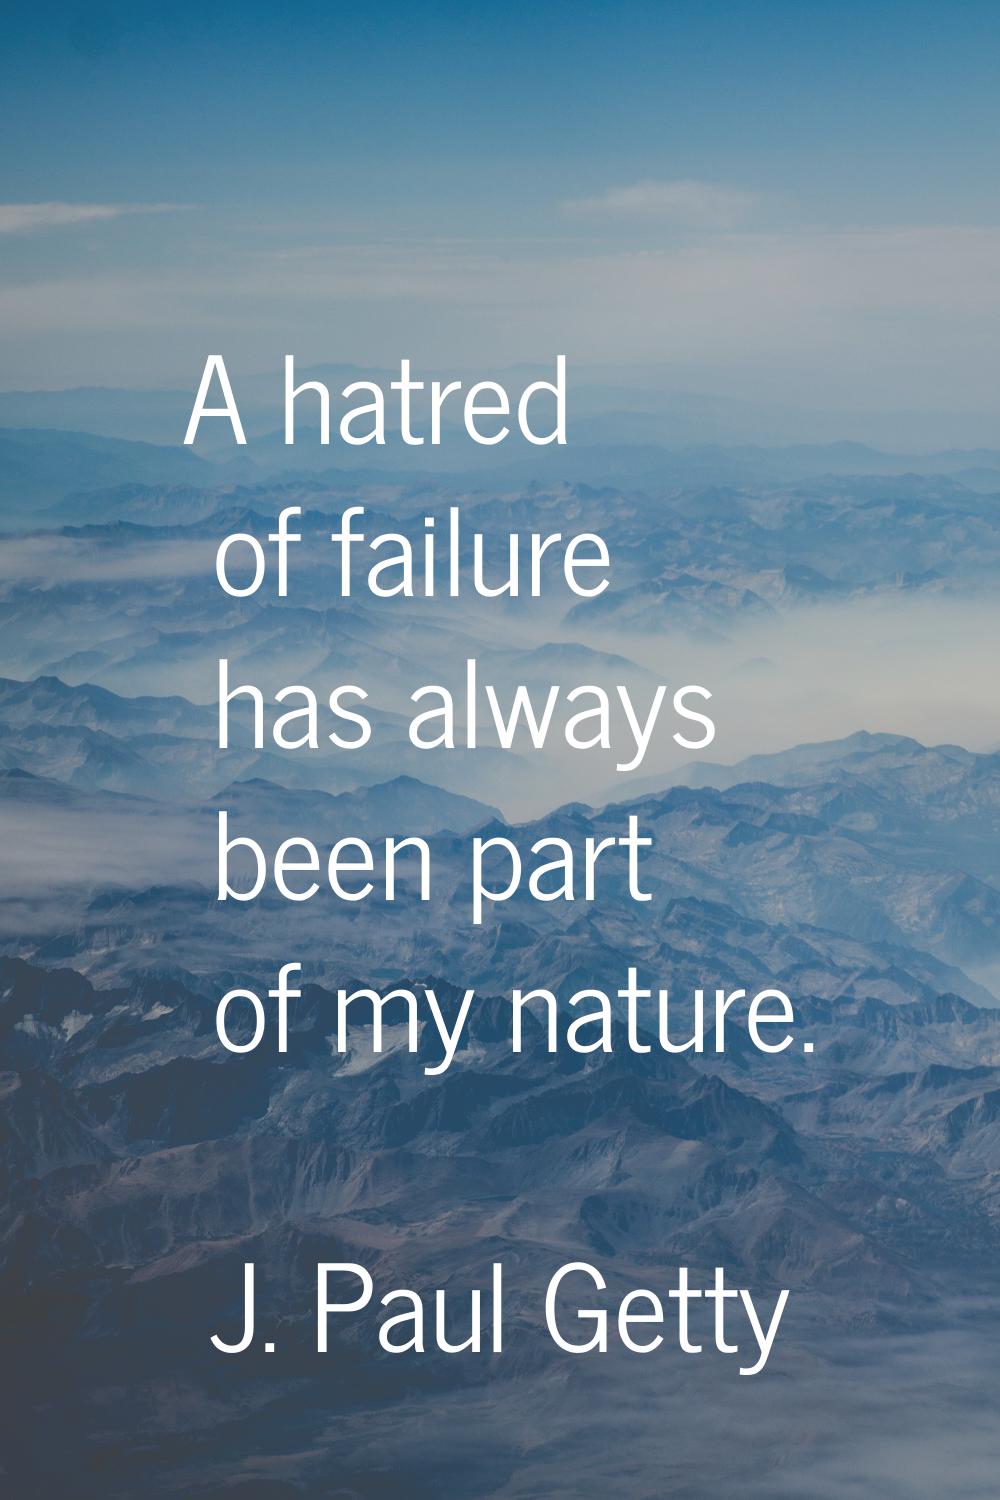 A hatred of failure has always been part of my nature.